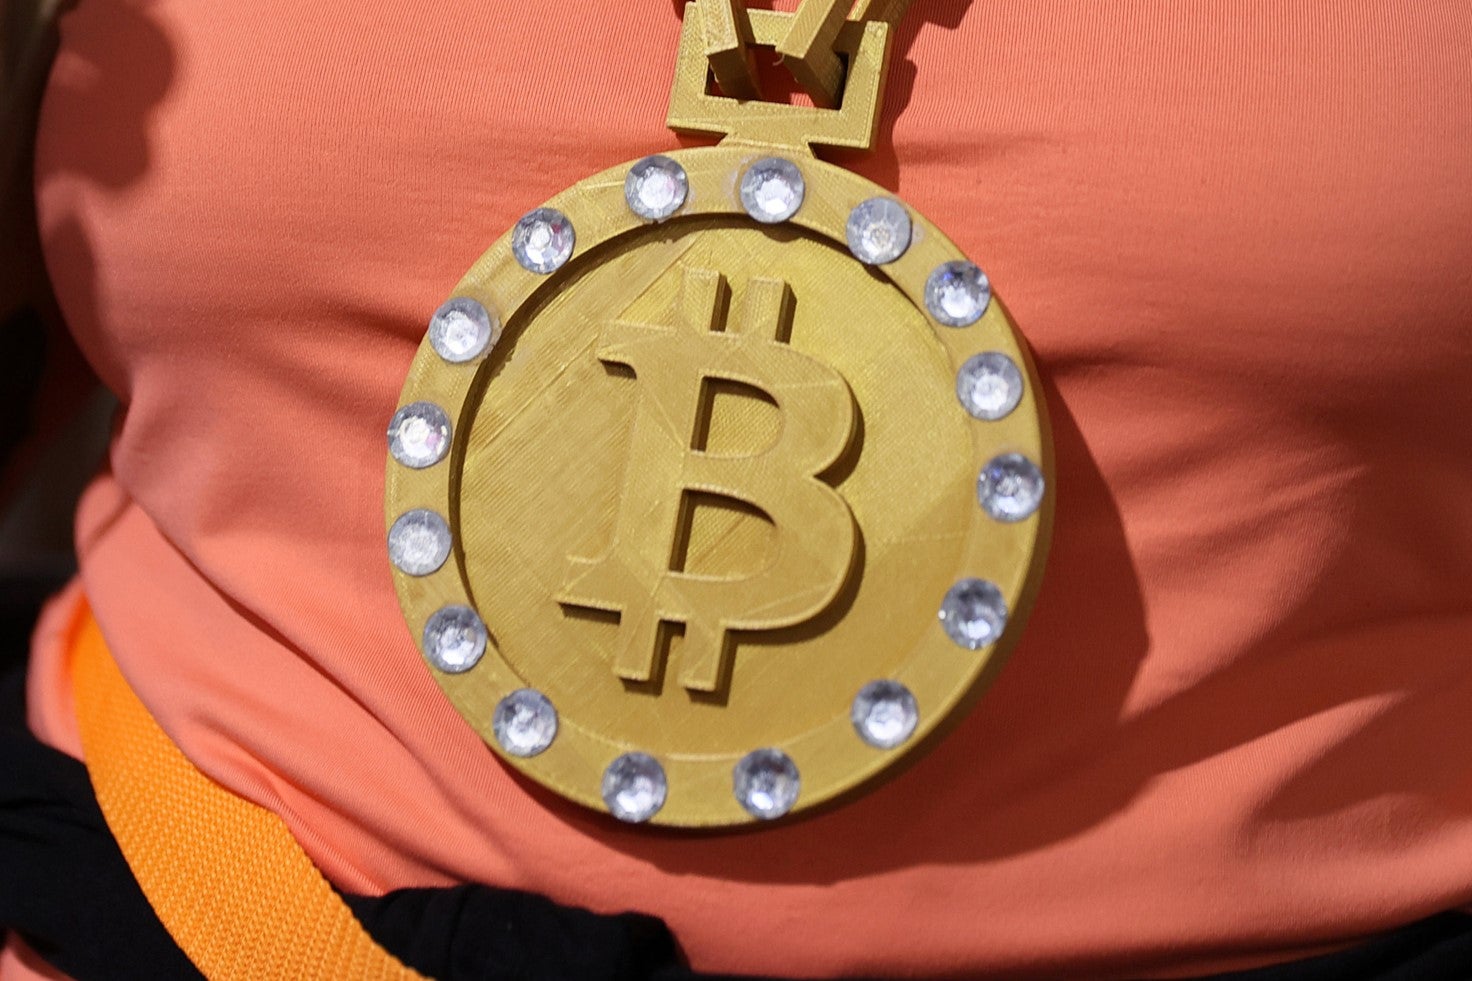 An attendee at the Bitcoin 2021 Convention in Miami, Florida on 4 June, 2021